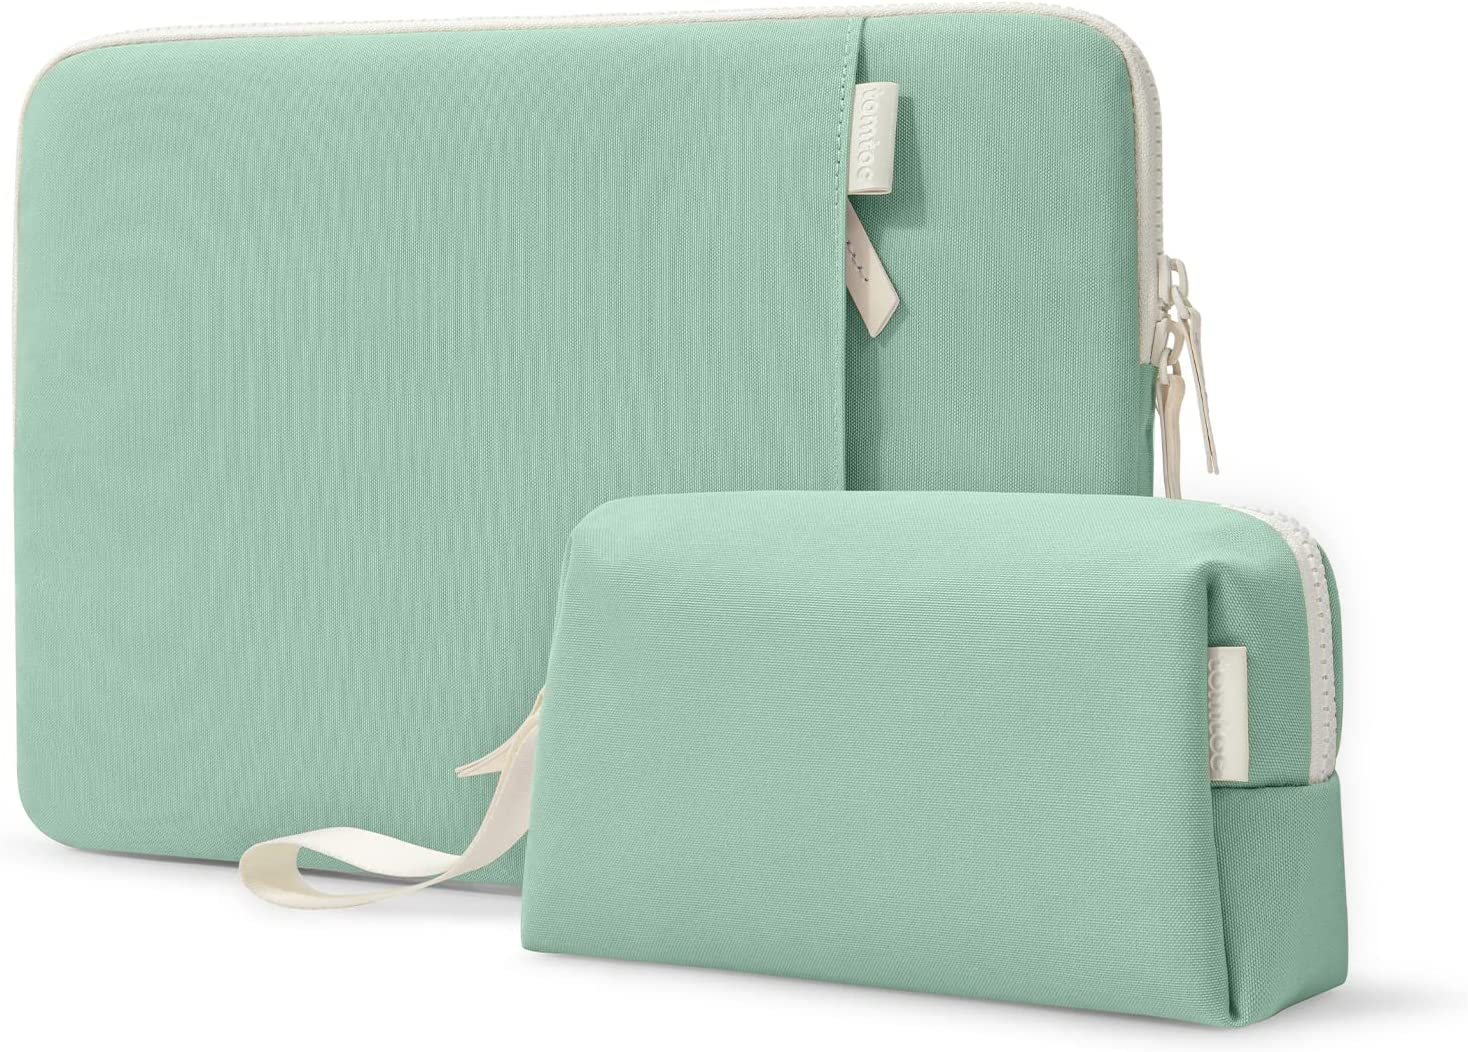 Tomtoc TheHer-A23 Jelly Laptop Sleeve Kit 13 inch - Green